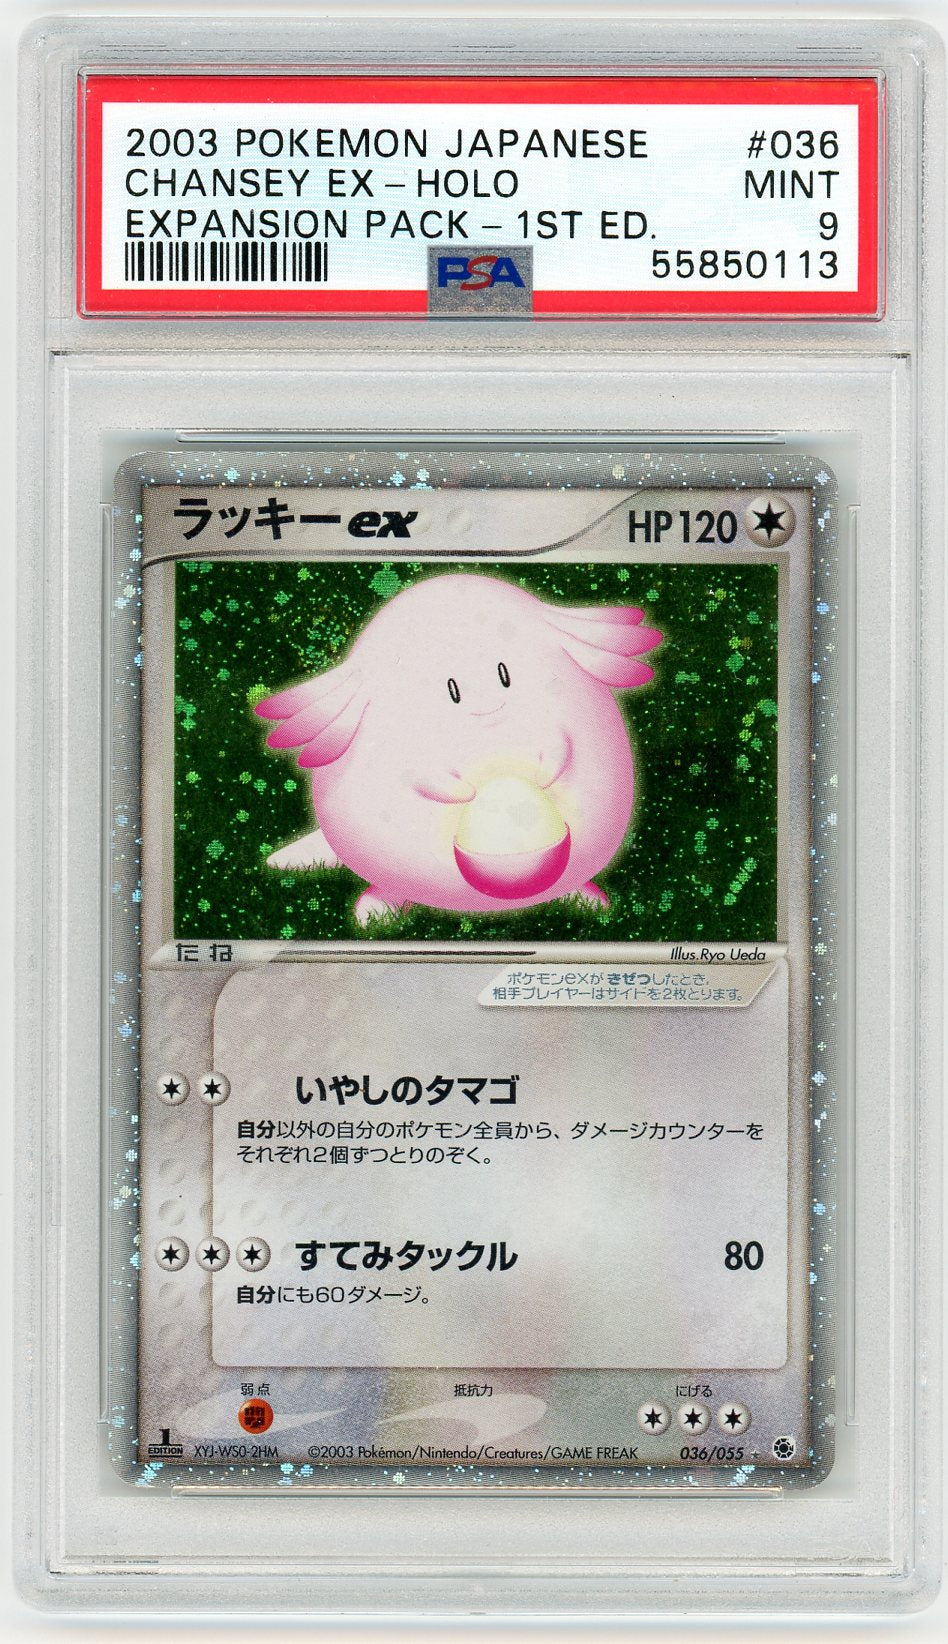 PSA 9 MINT Chansey ex 036/055 - Japanese Expansion Pack 1st Edition 2003